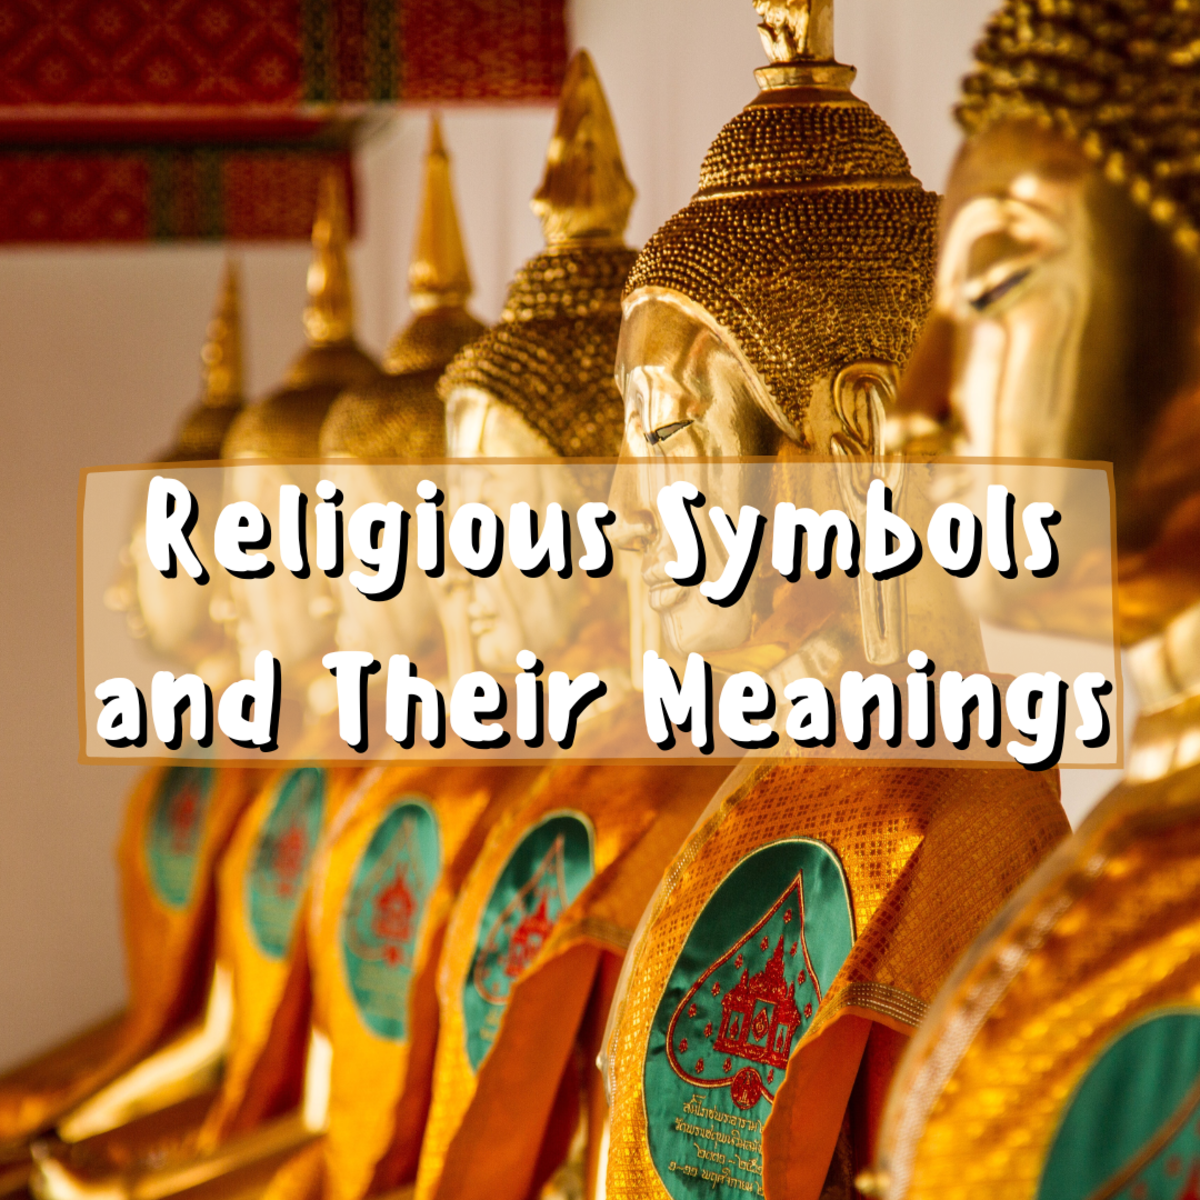 9 Religious Symbols and Their Meanings